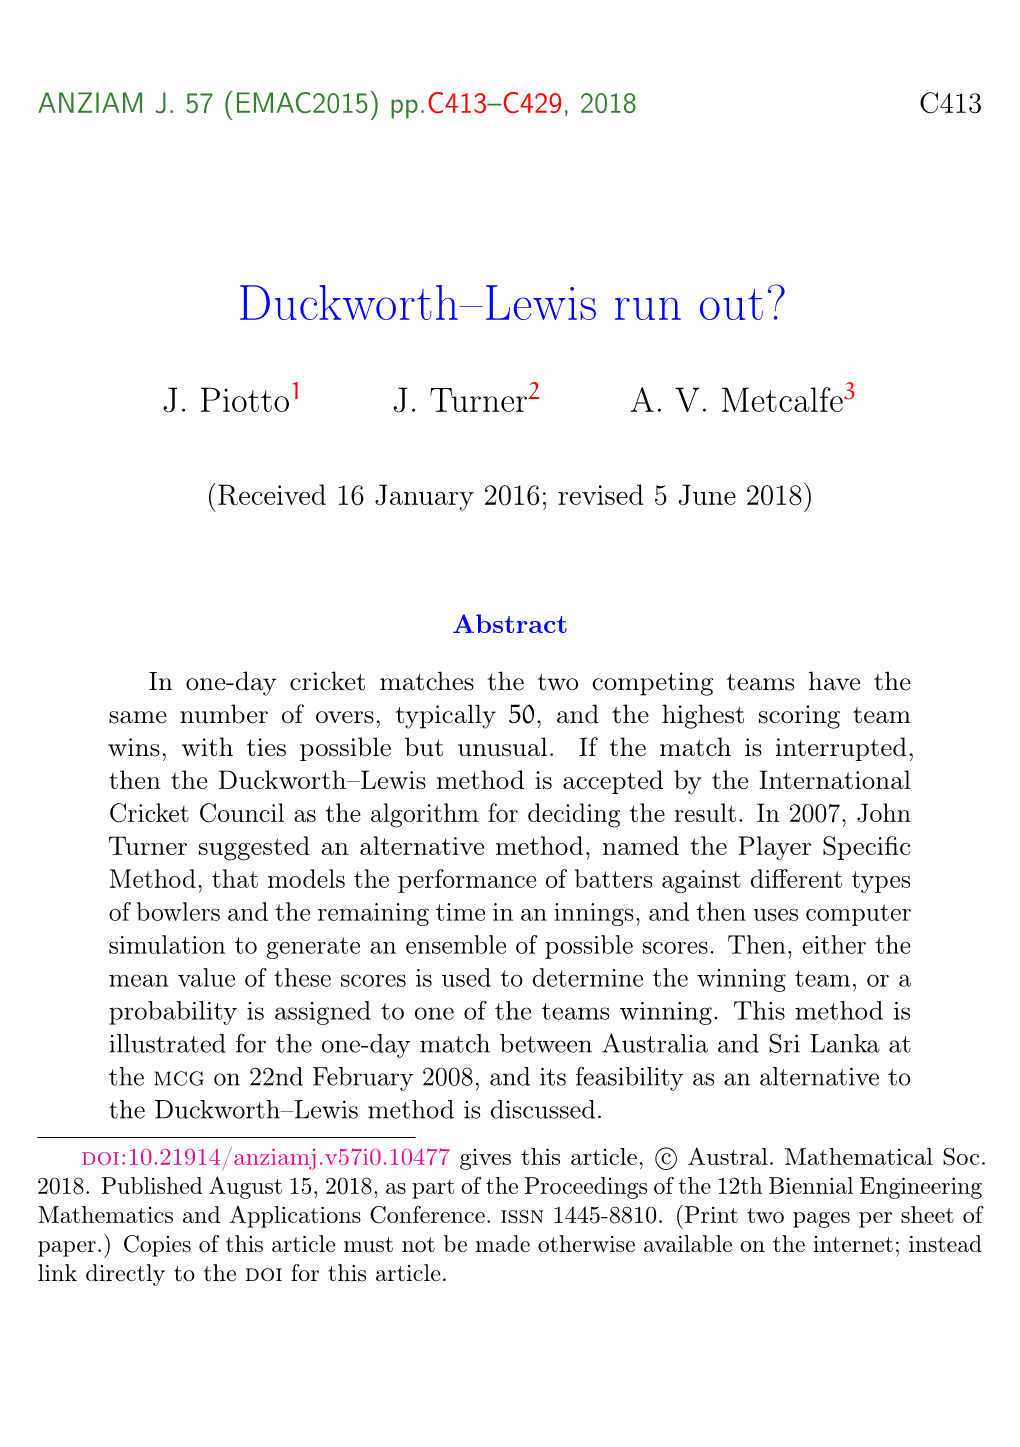 Duckworth–Lewis Run Out?